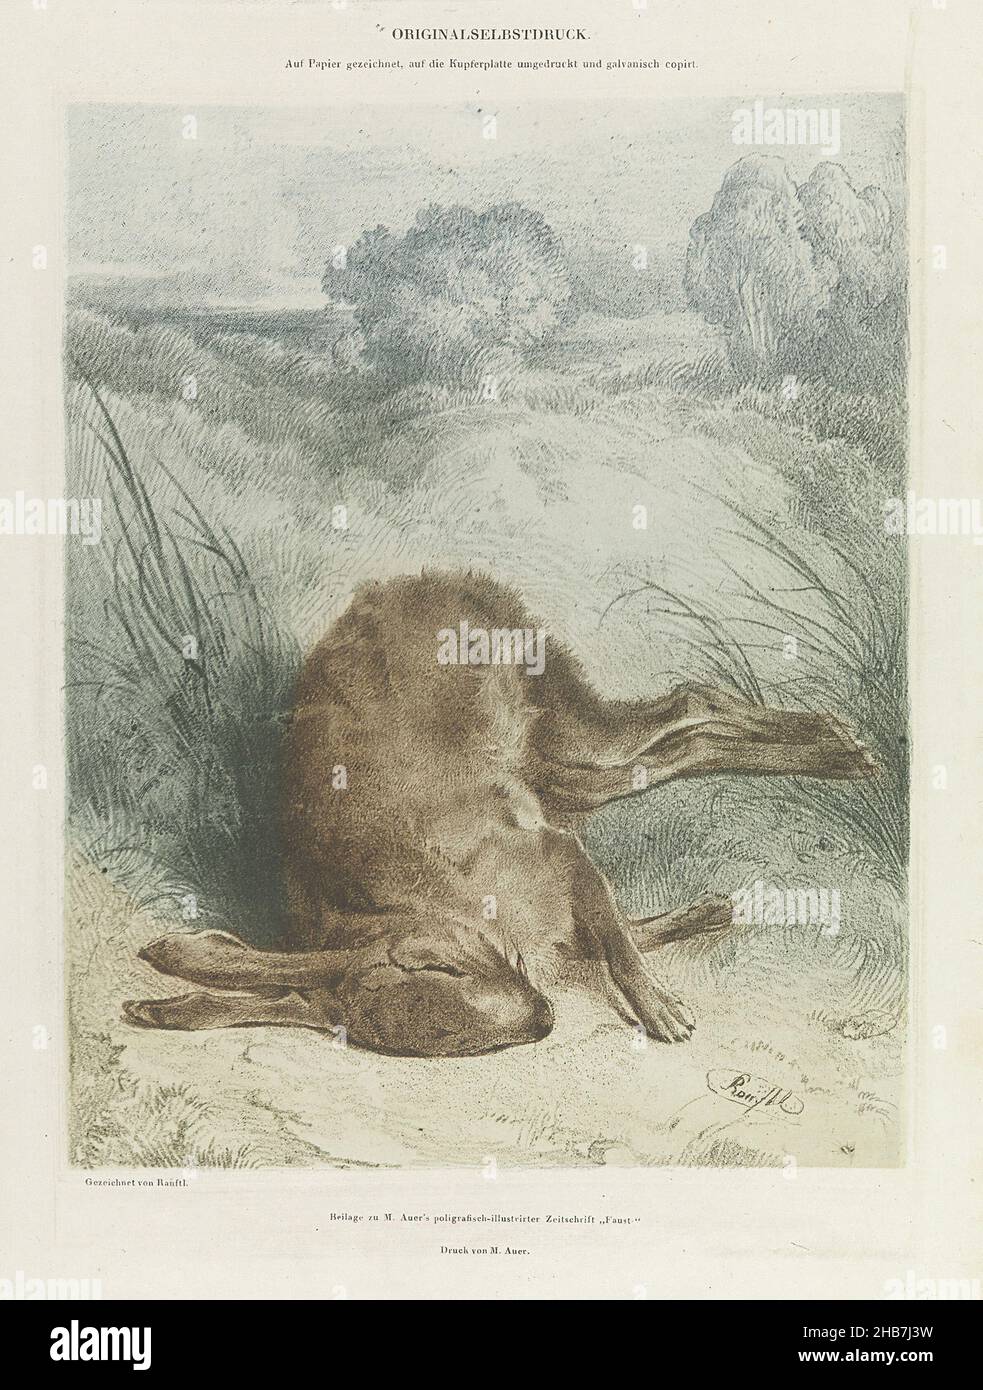 Dead hare in a field, Sheet from series of 16 Naturselbstdrucke Auer., anonymous, Alois Auer, (mentioned on object), 1855, paper, height 344 mm × width 242 mm Stock Photo